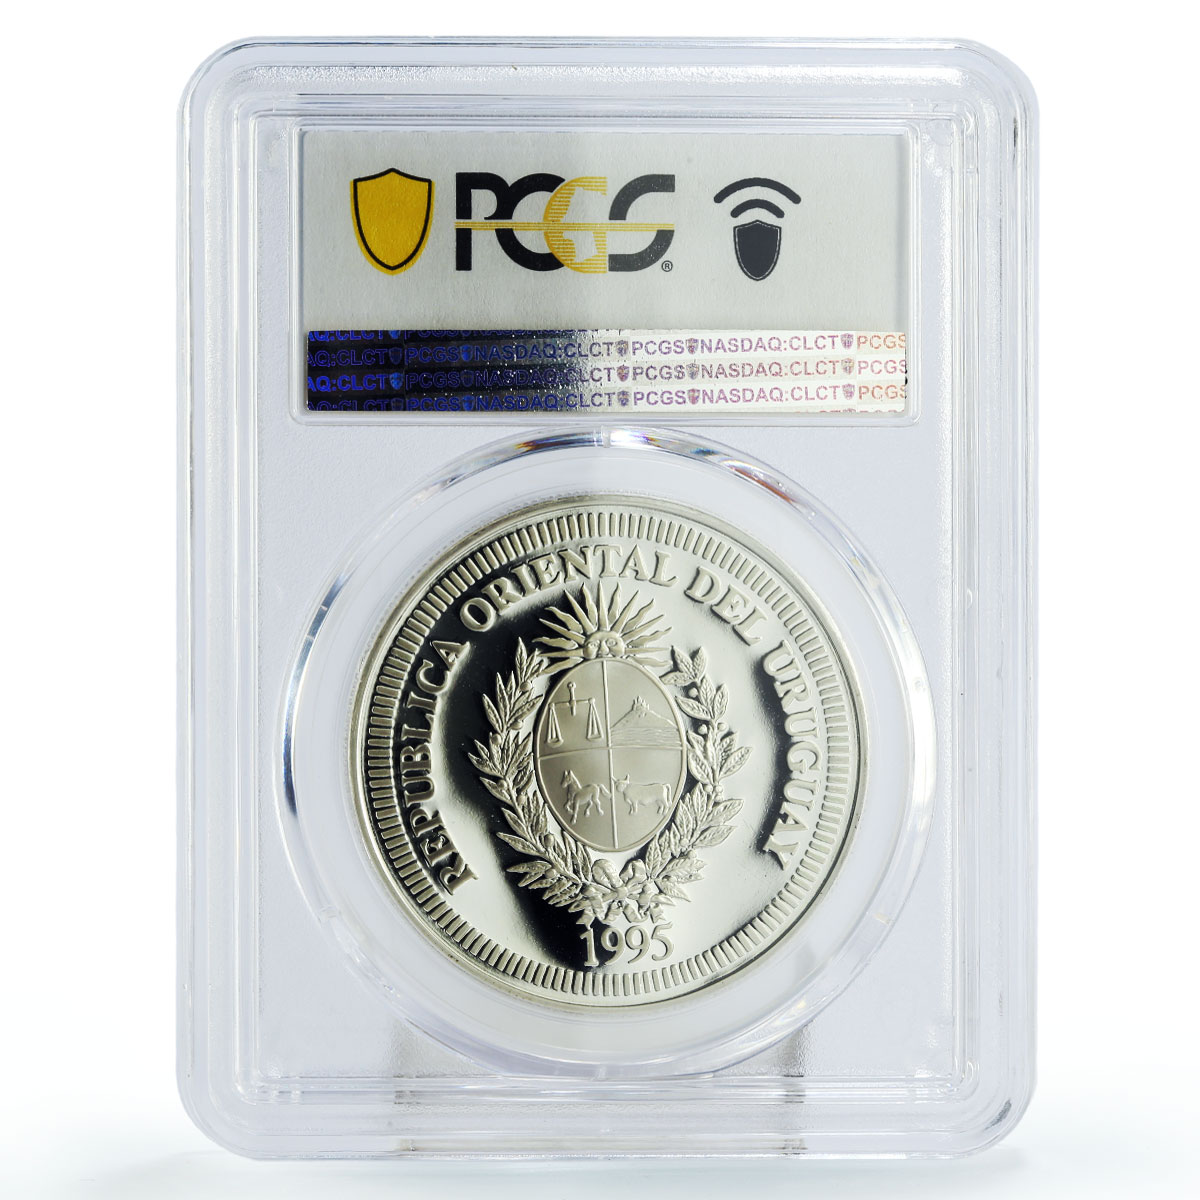 Uruguay 200 pesos 50 Years of the United Nations PR70 PCGS silver coin 1995